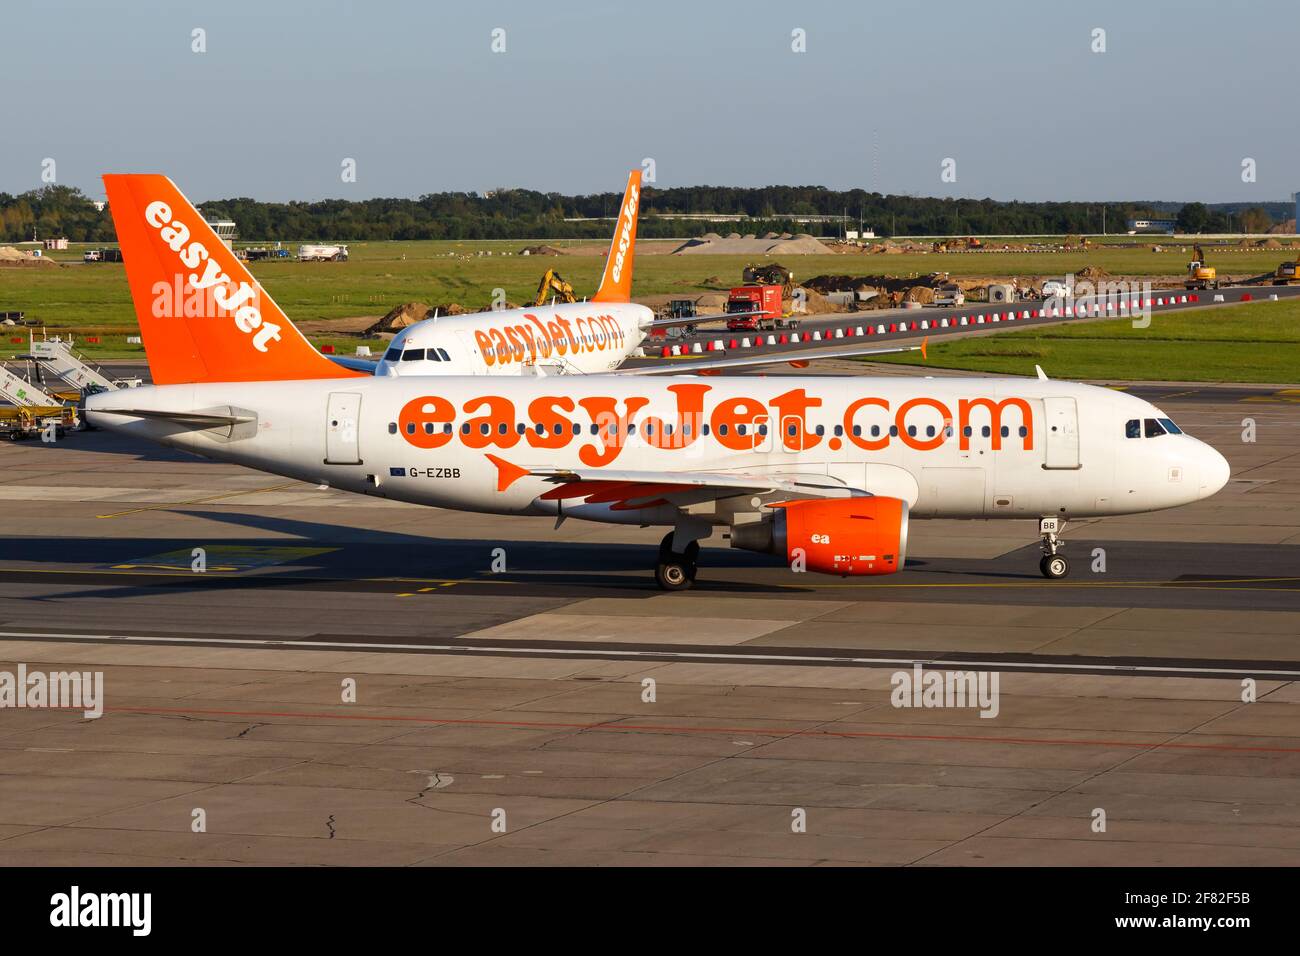 Berlin, Germany – August 29, 2017: easyJet Airbus A319 airplanes at Berlin Schoenefeld airport (SXF) in Germany. Airbus is a European aircraft manufac Stock Photo